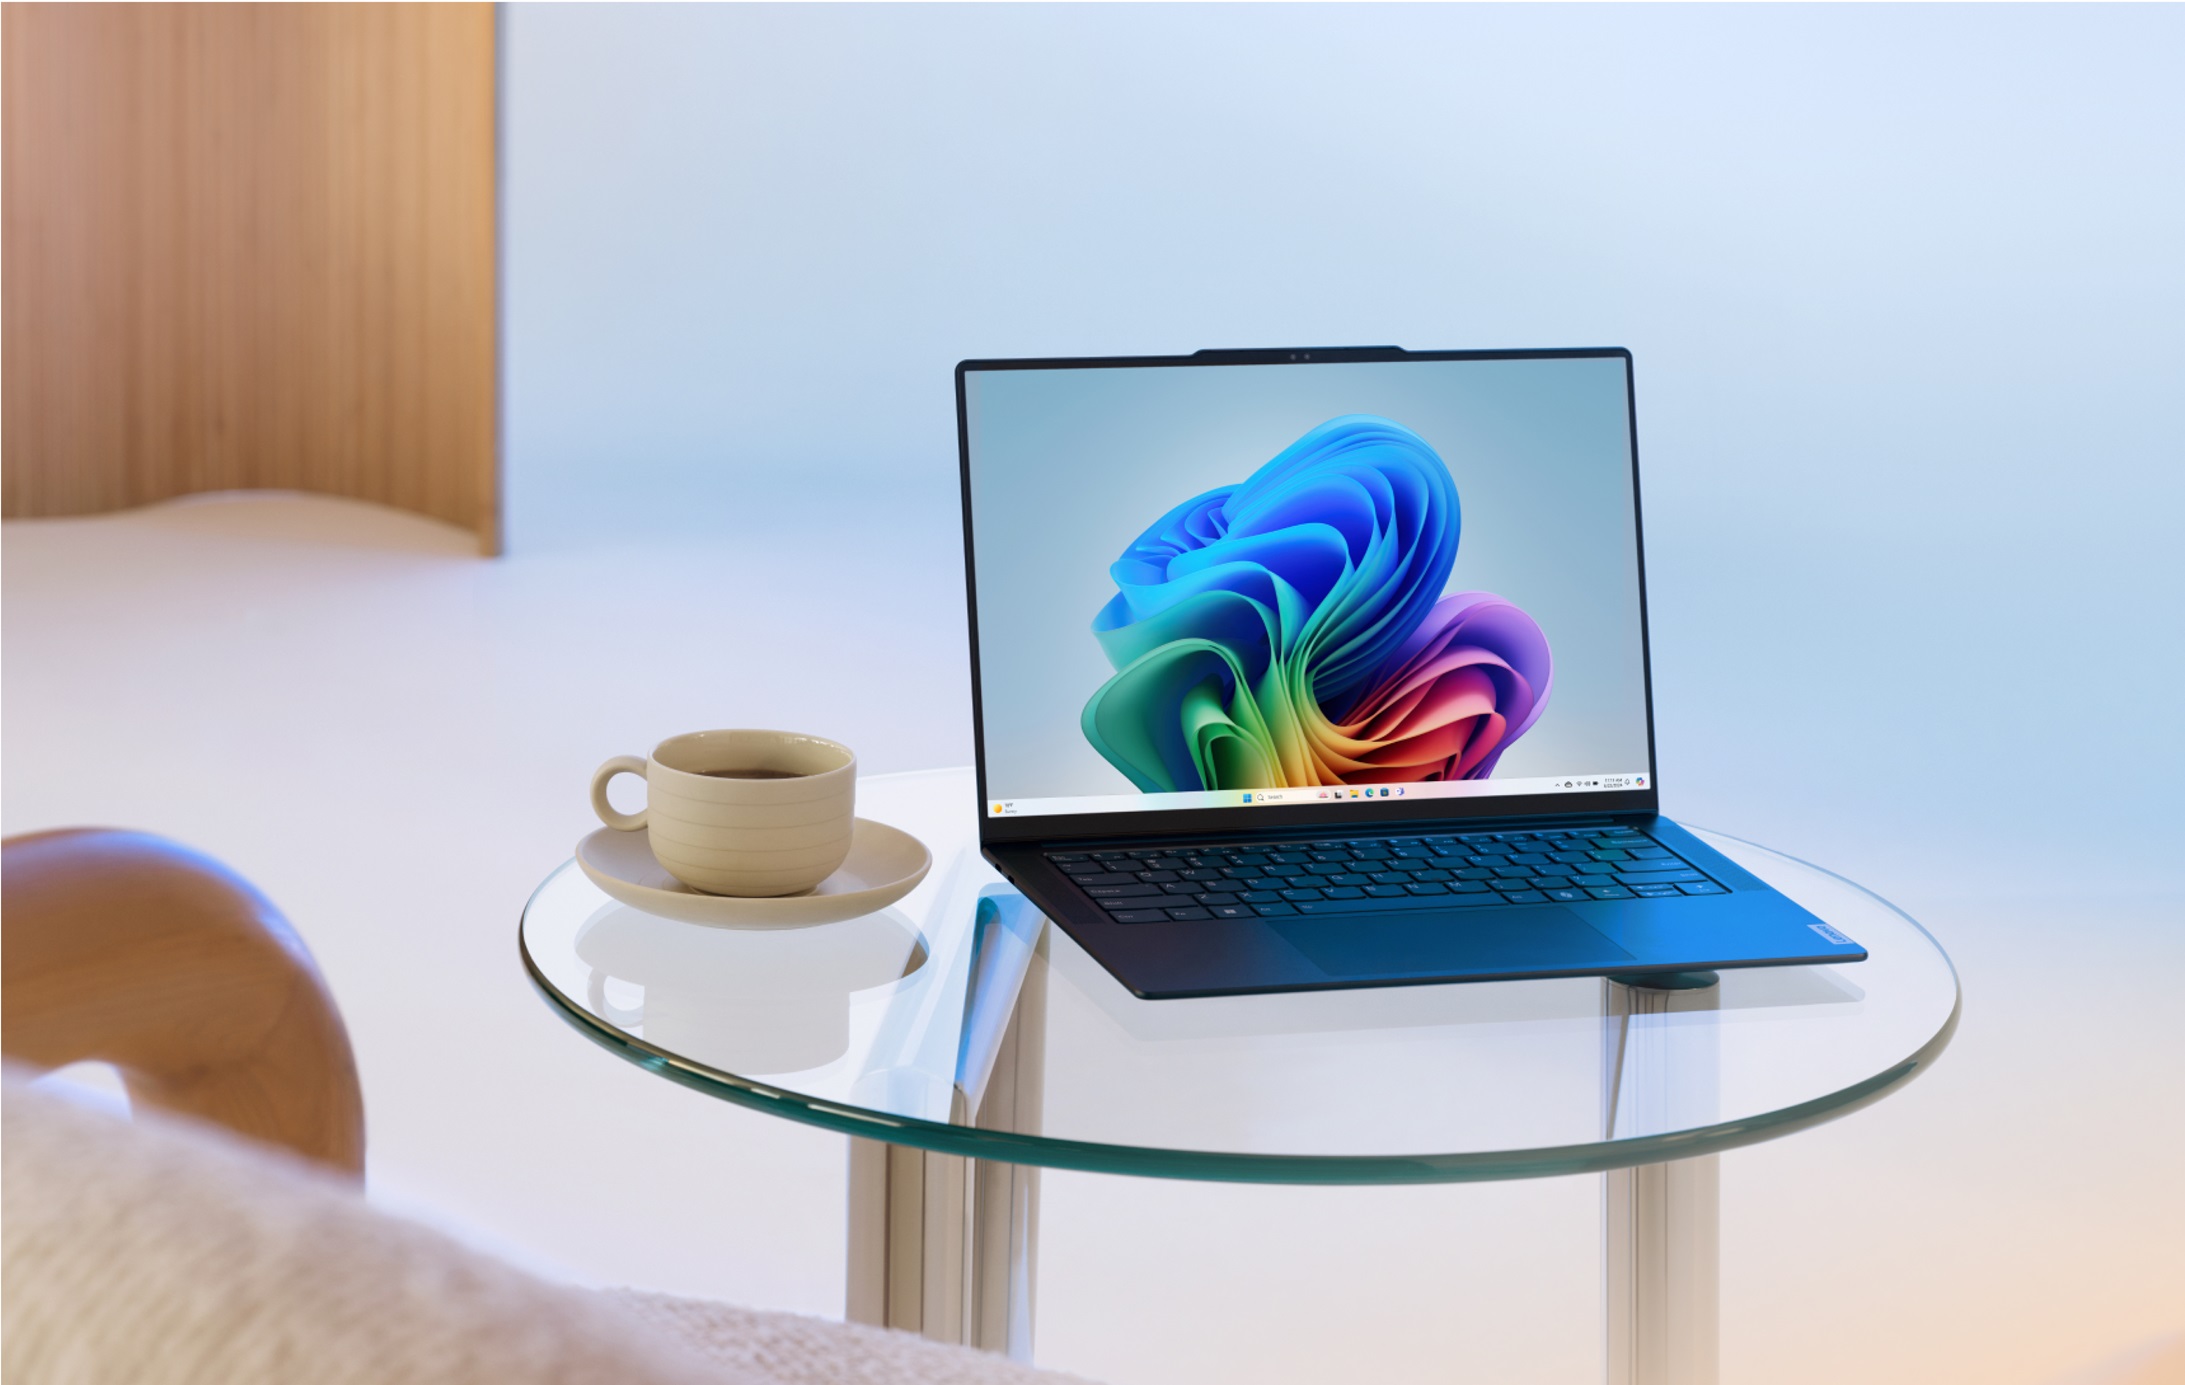 A Windows 11 PC showing the multicolor bloom desktop background. The laptop is on a small, circular, glass table next to a coffee cup.